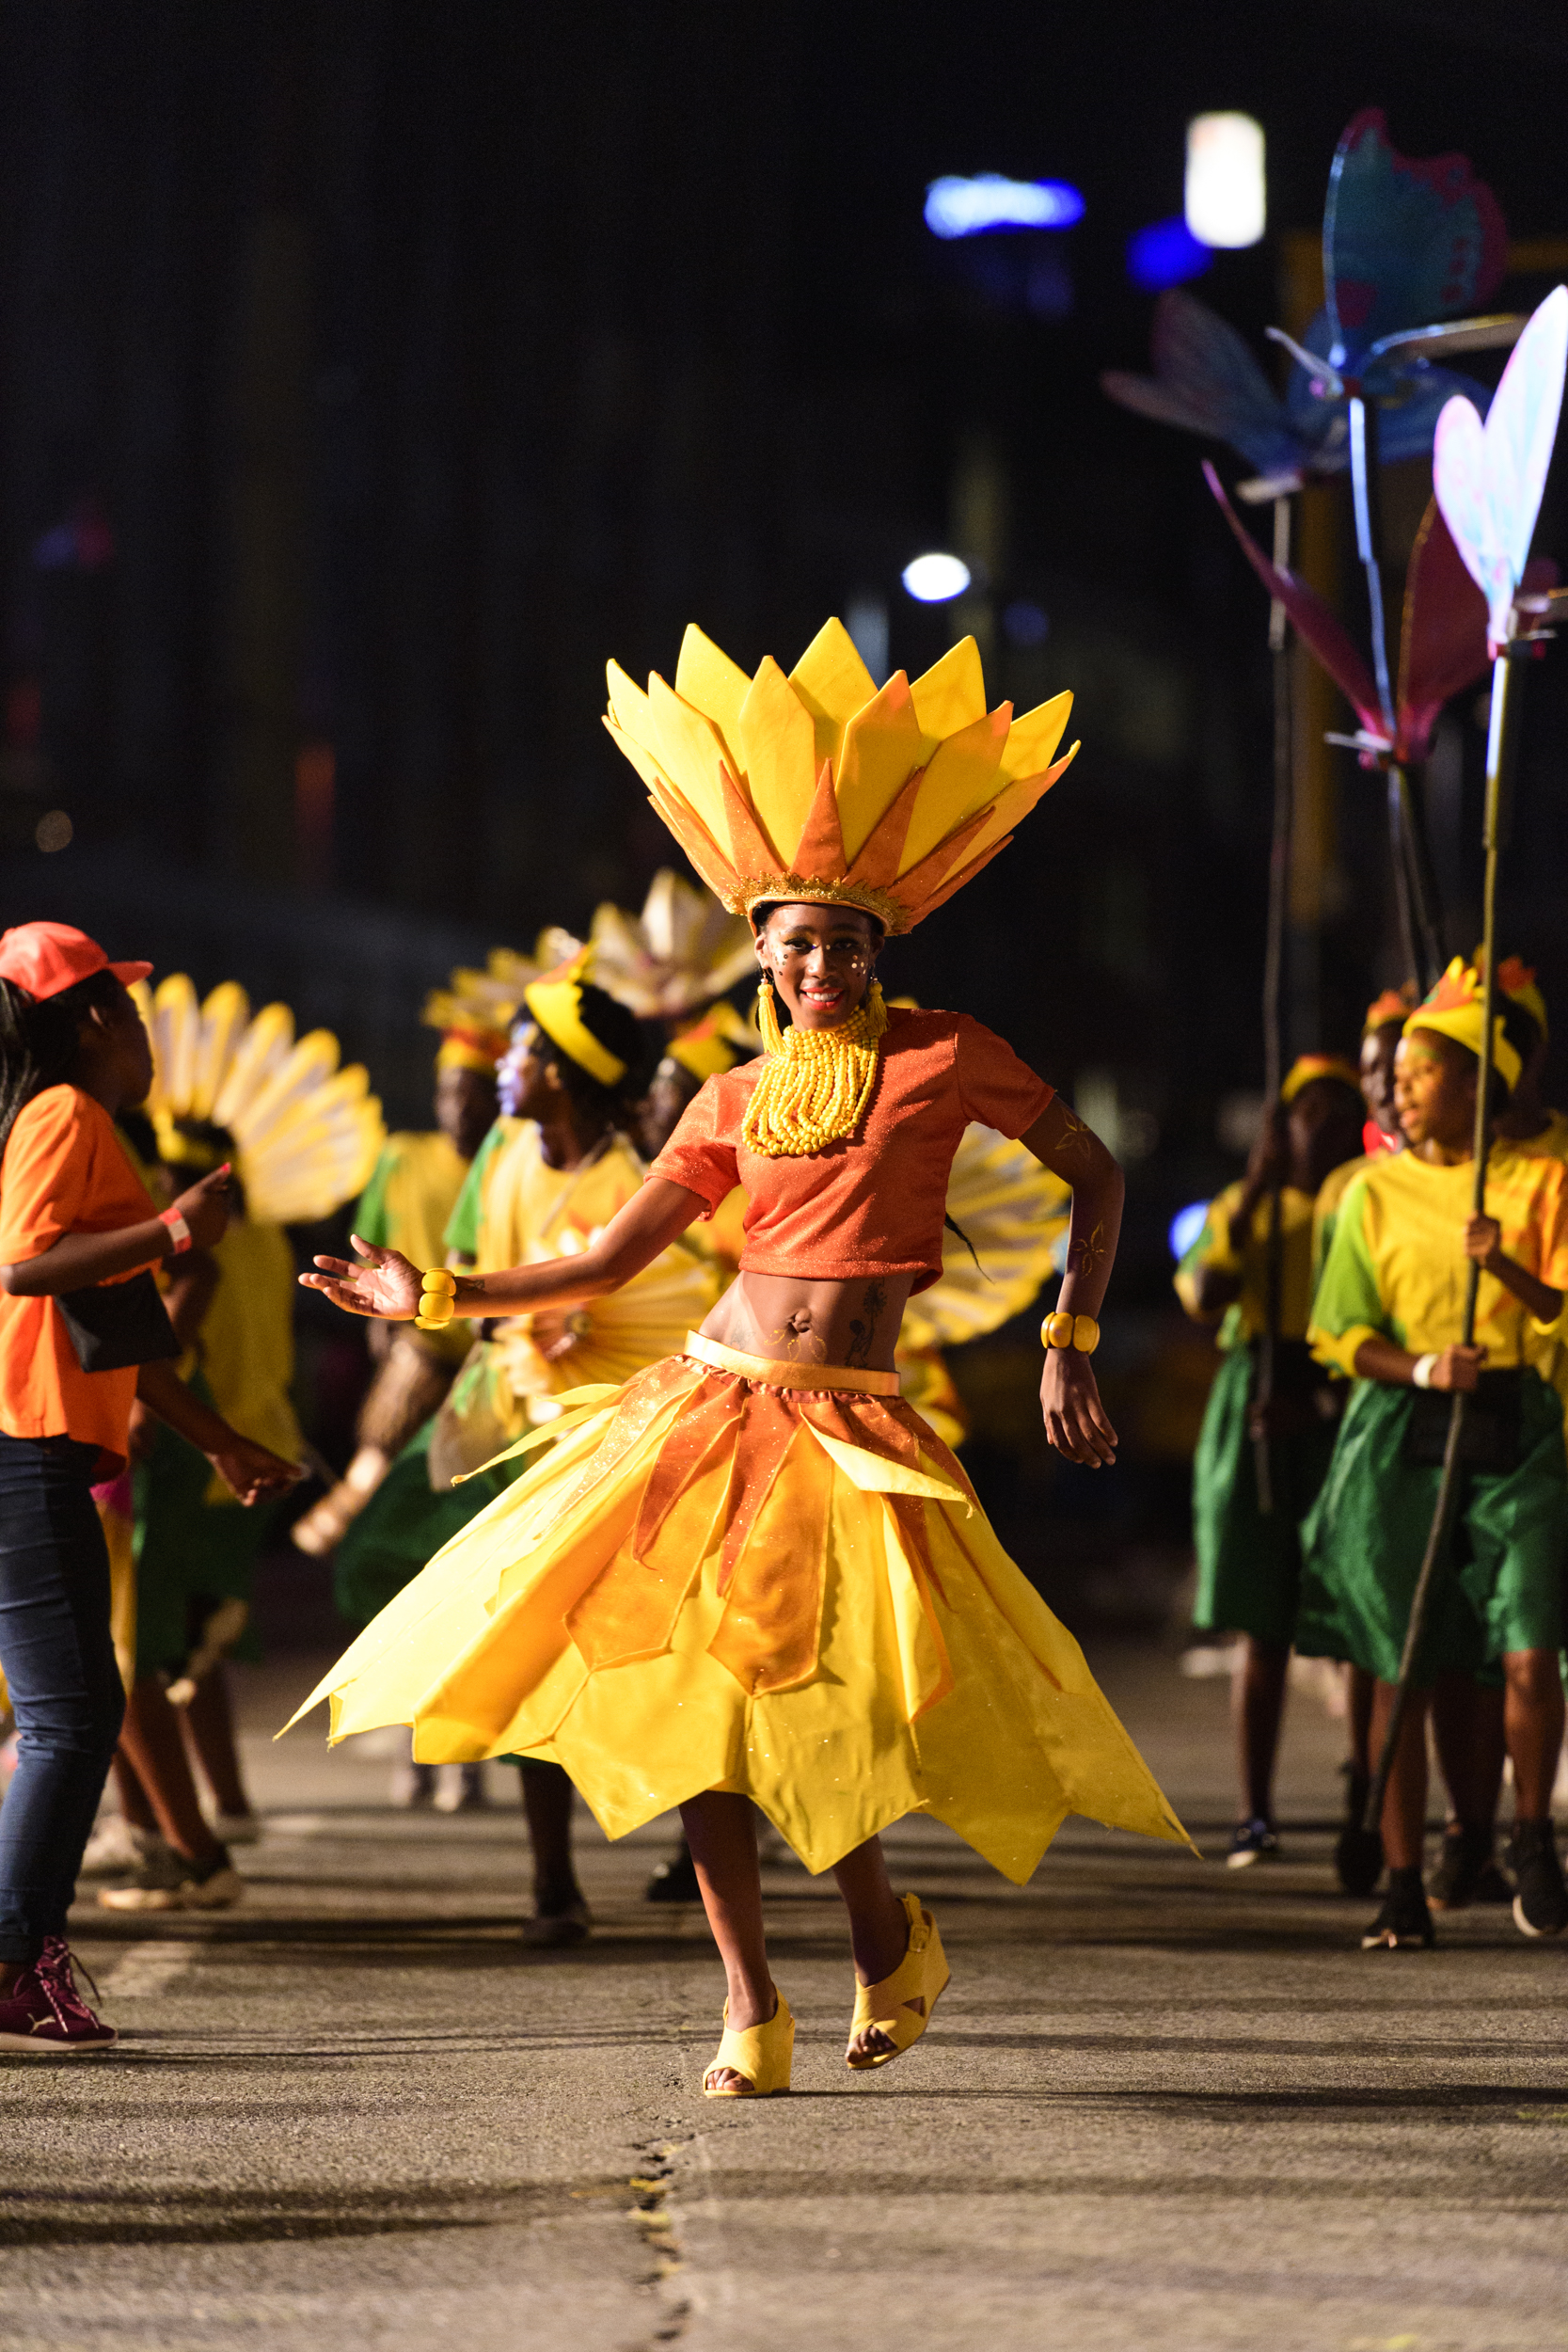 Cape Town Carnival celebrates the hero in each of us